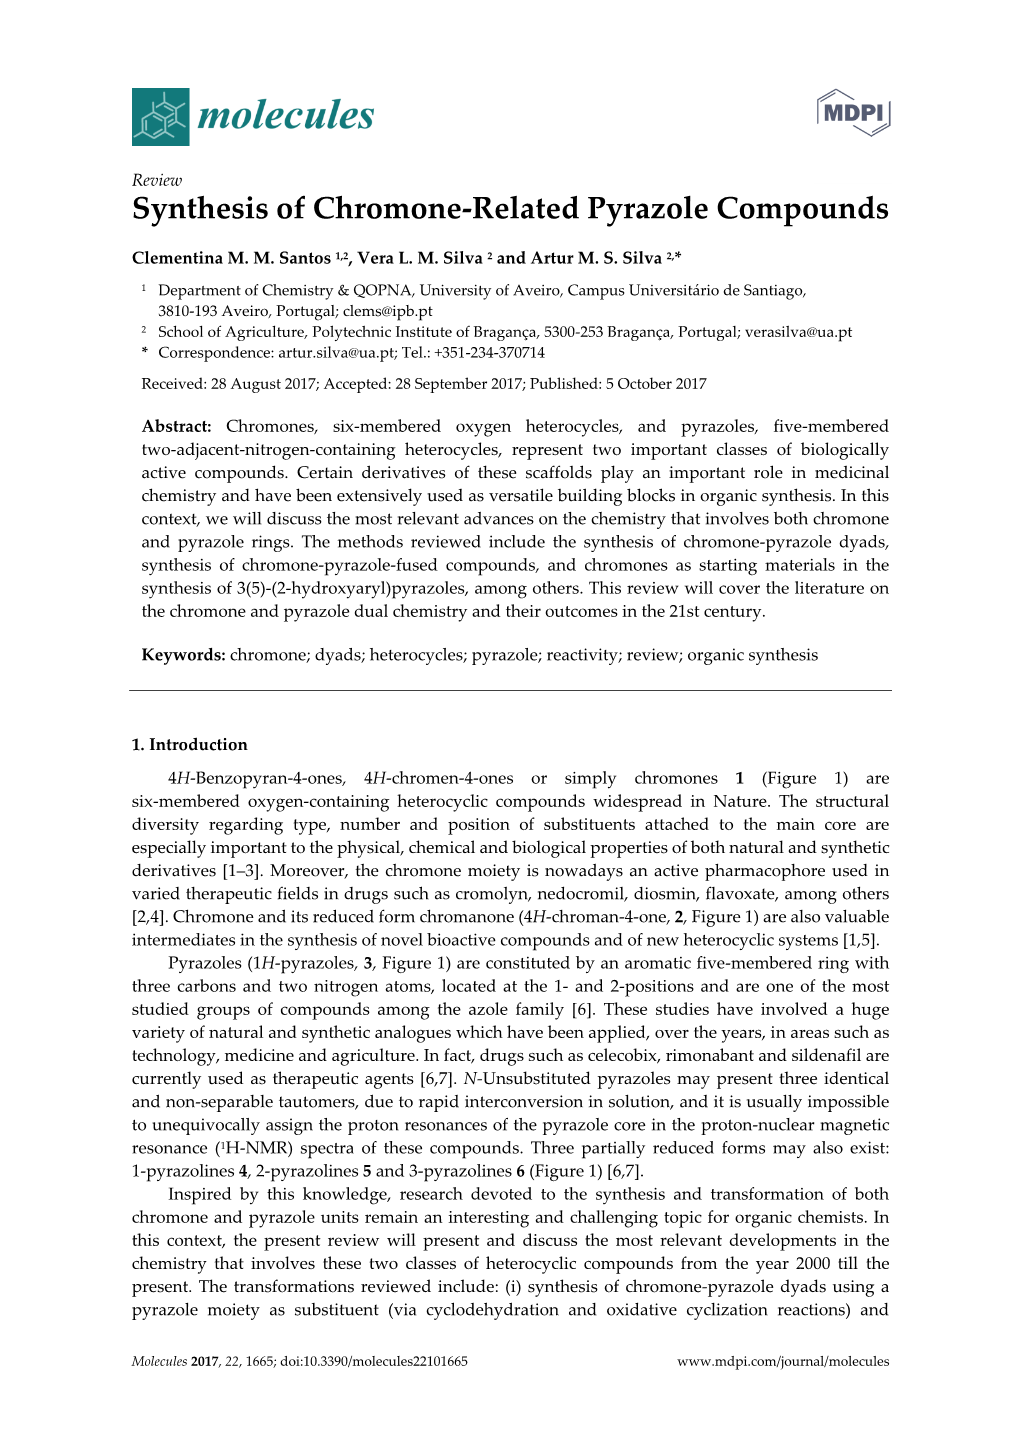 Synthesis of Chromone-Related Pyrazole Compounds